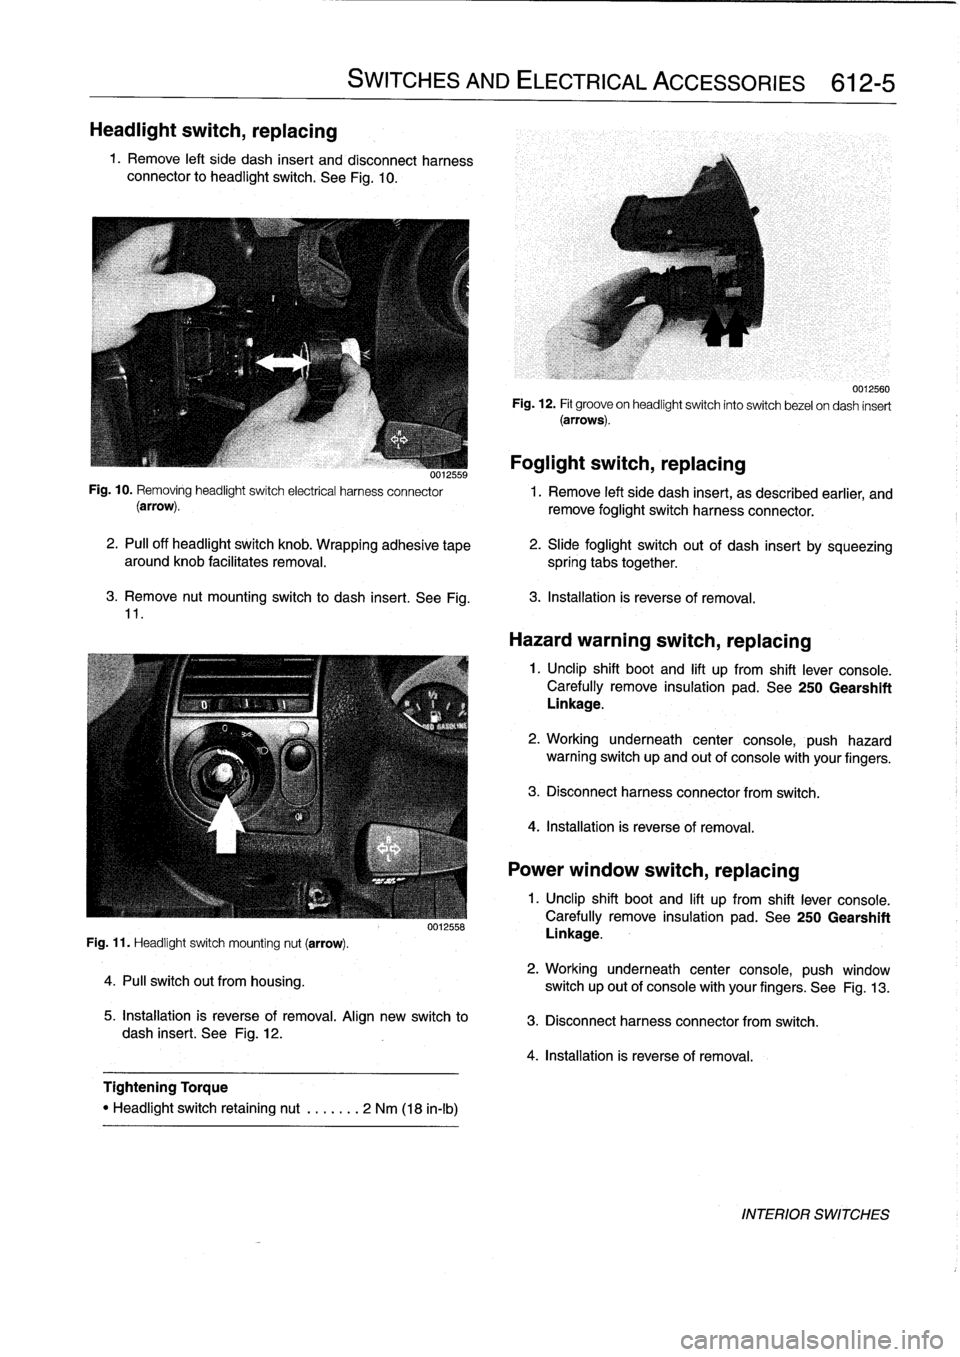 BMW 323i 1993 E36 Manual PDF 
Headlight
switch,
replacing

1
.
Remove
left
side
dash
insert
and
disconnect
harness
connector
to
headlight
switch
.
See
Fig
.
10
.

3
.
Remove
nut
mounting
switch
to
dash
insert
.
See
Fig
.
11
.

Fi